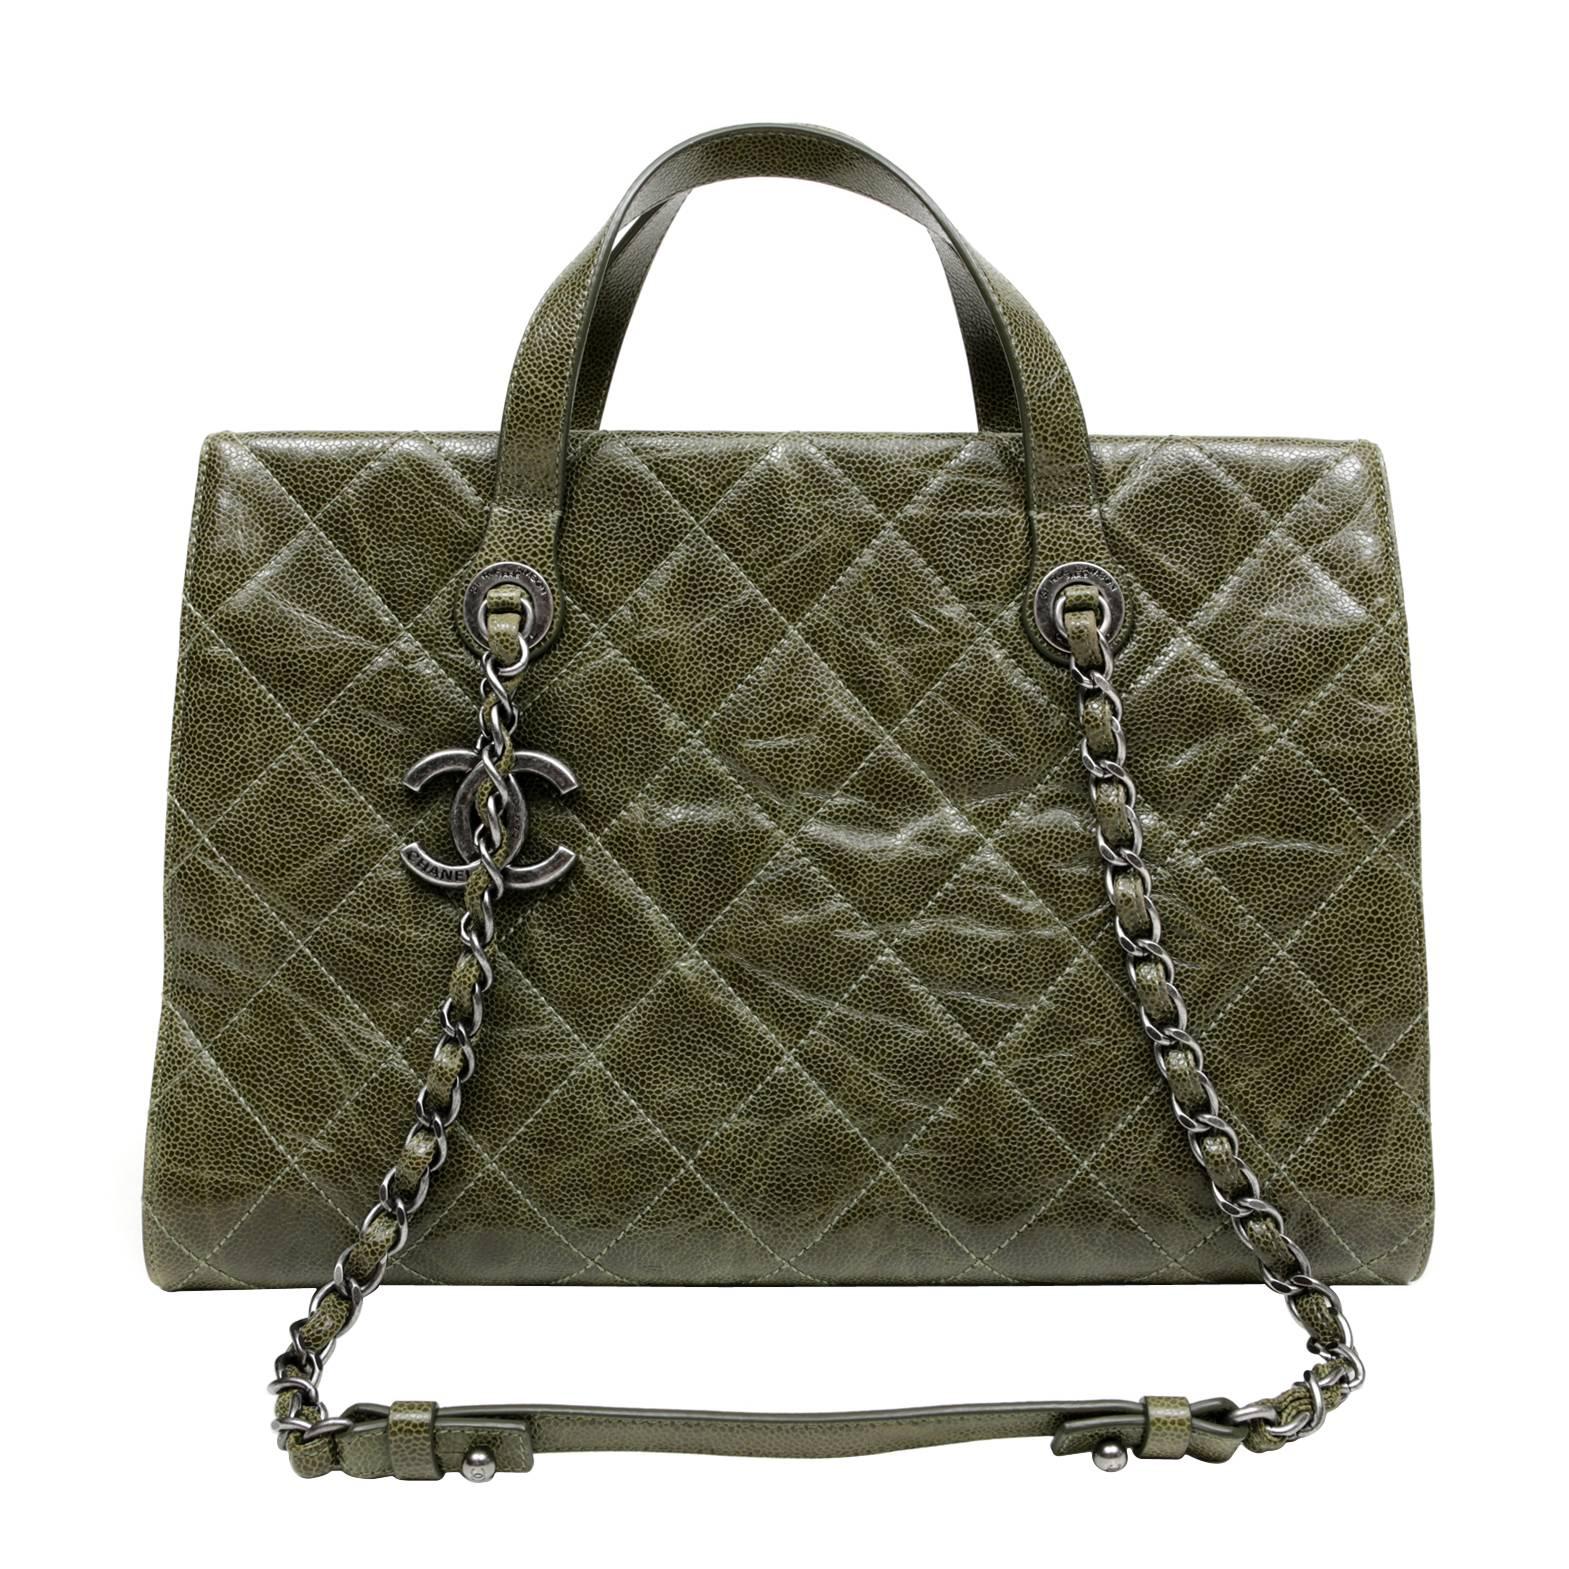 Chanel Olive Green Caviar Leather Crave Tote Bag For Sale